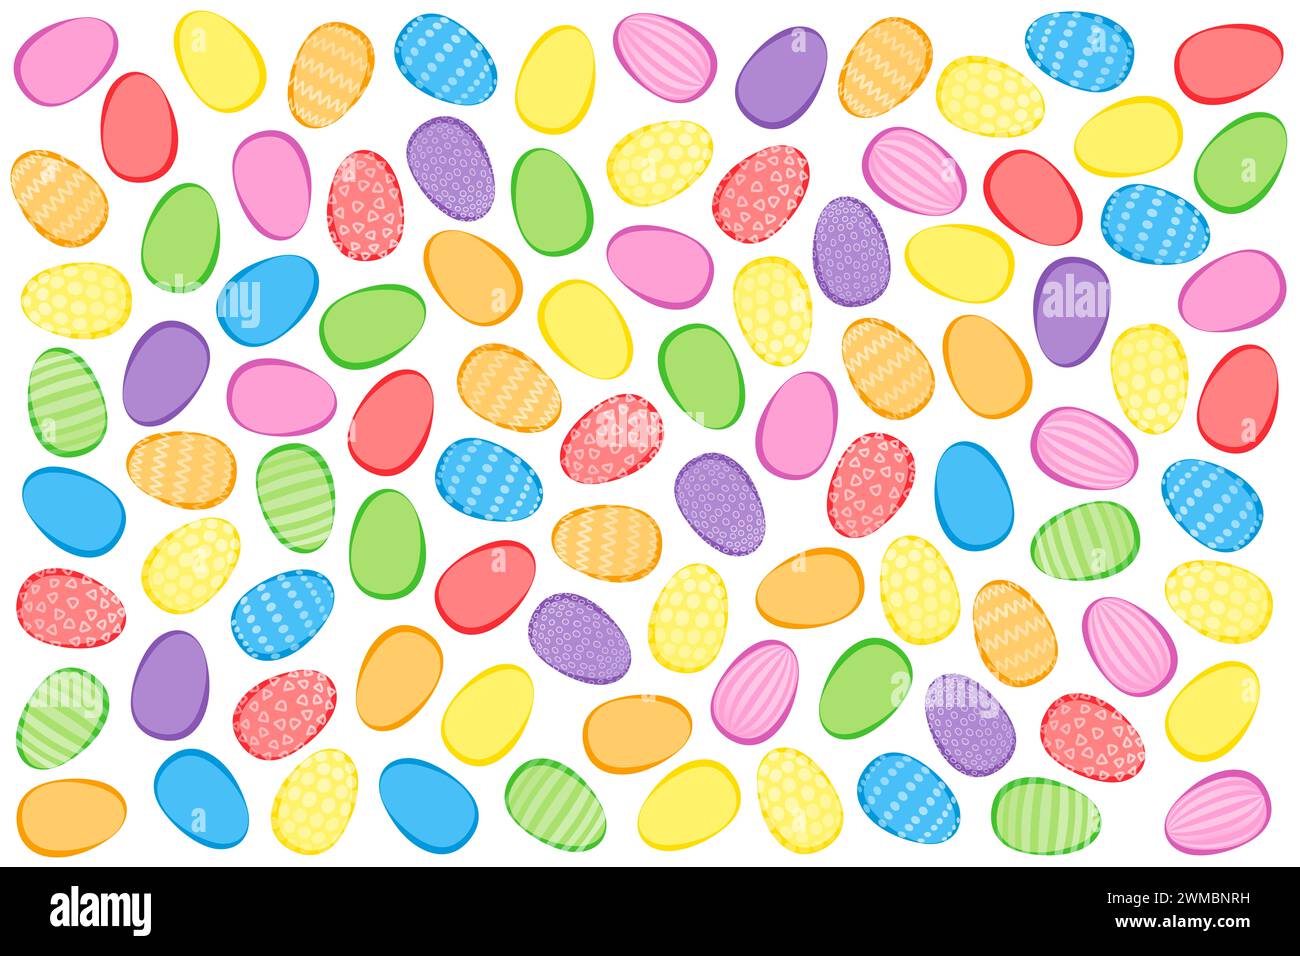 Colorful Easter eggs background. Numerous easter eggs, brightly colored and some with decorative patterns, criss-cross and randomly arranged. Stock Photo